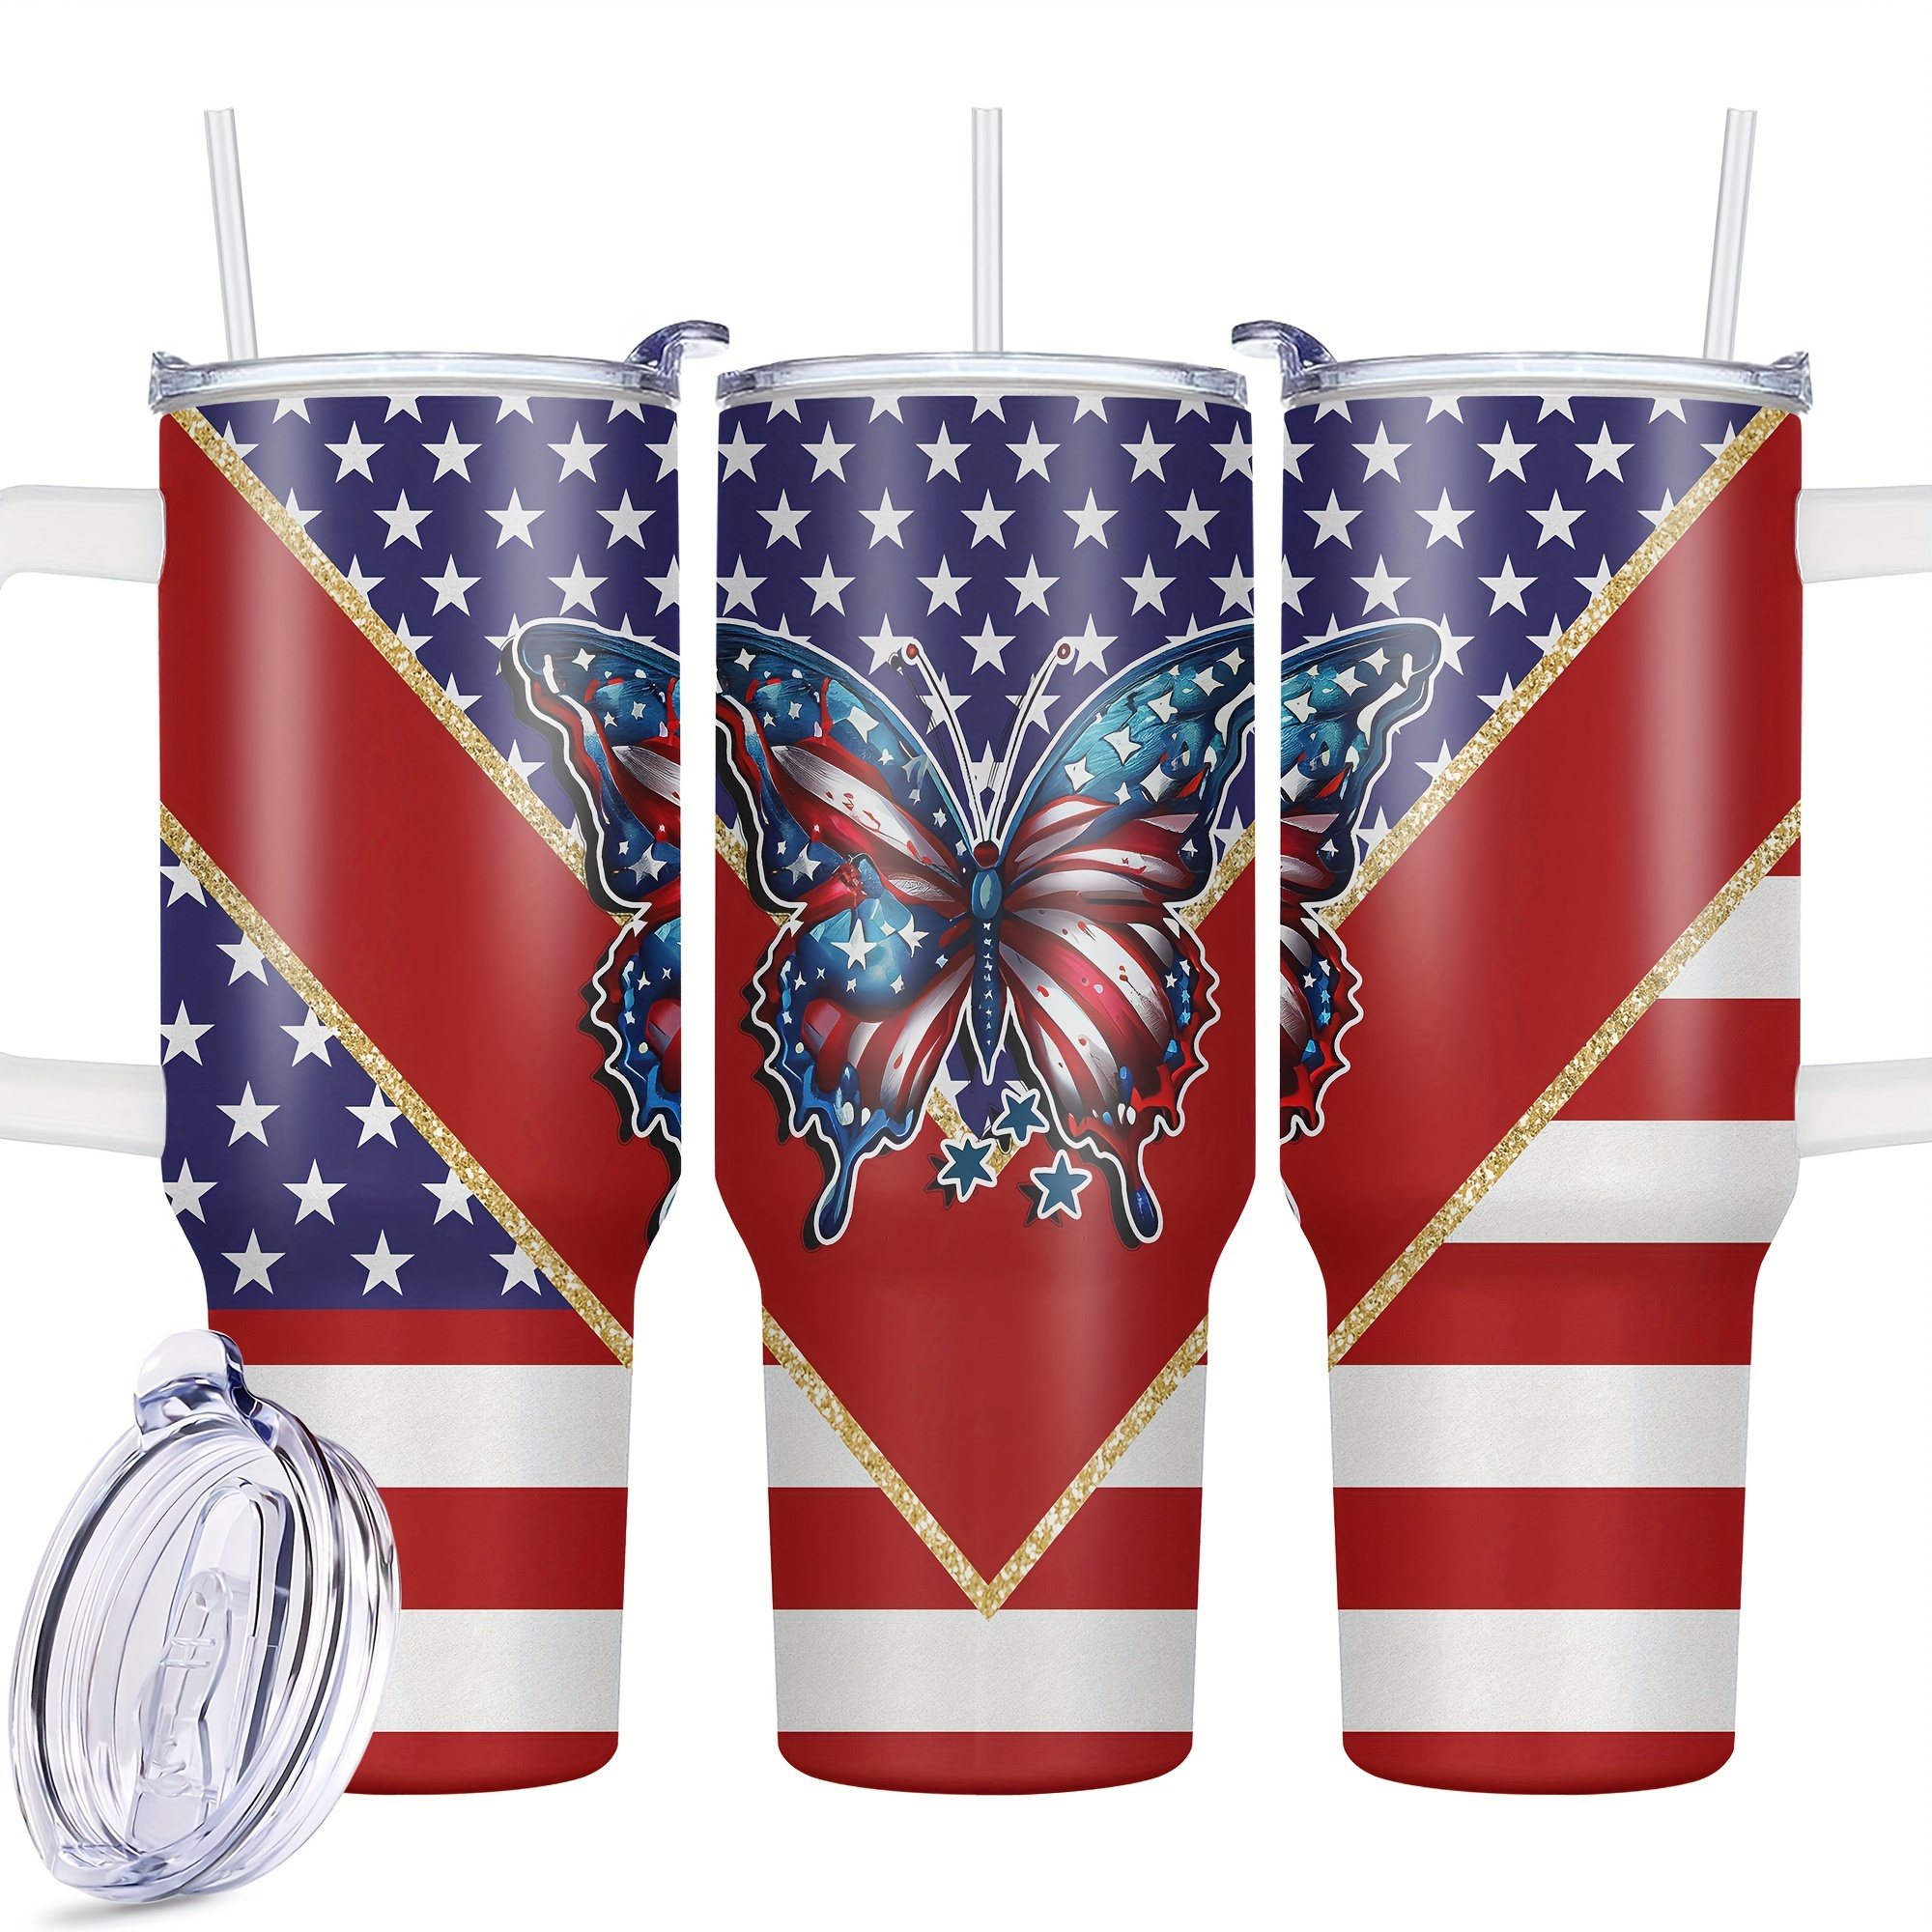 

40oz Patriotic Stainless Steel Tumbler With Lid & Handle - Double-walled Insulated Water Bottle For Independence Day, Perfect For Car, Home, Office - Pvc-free, Oval Shape